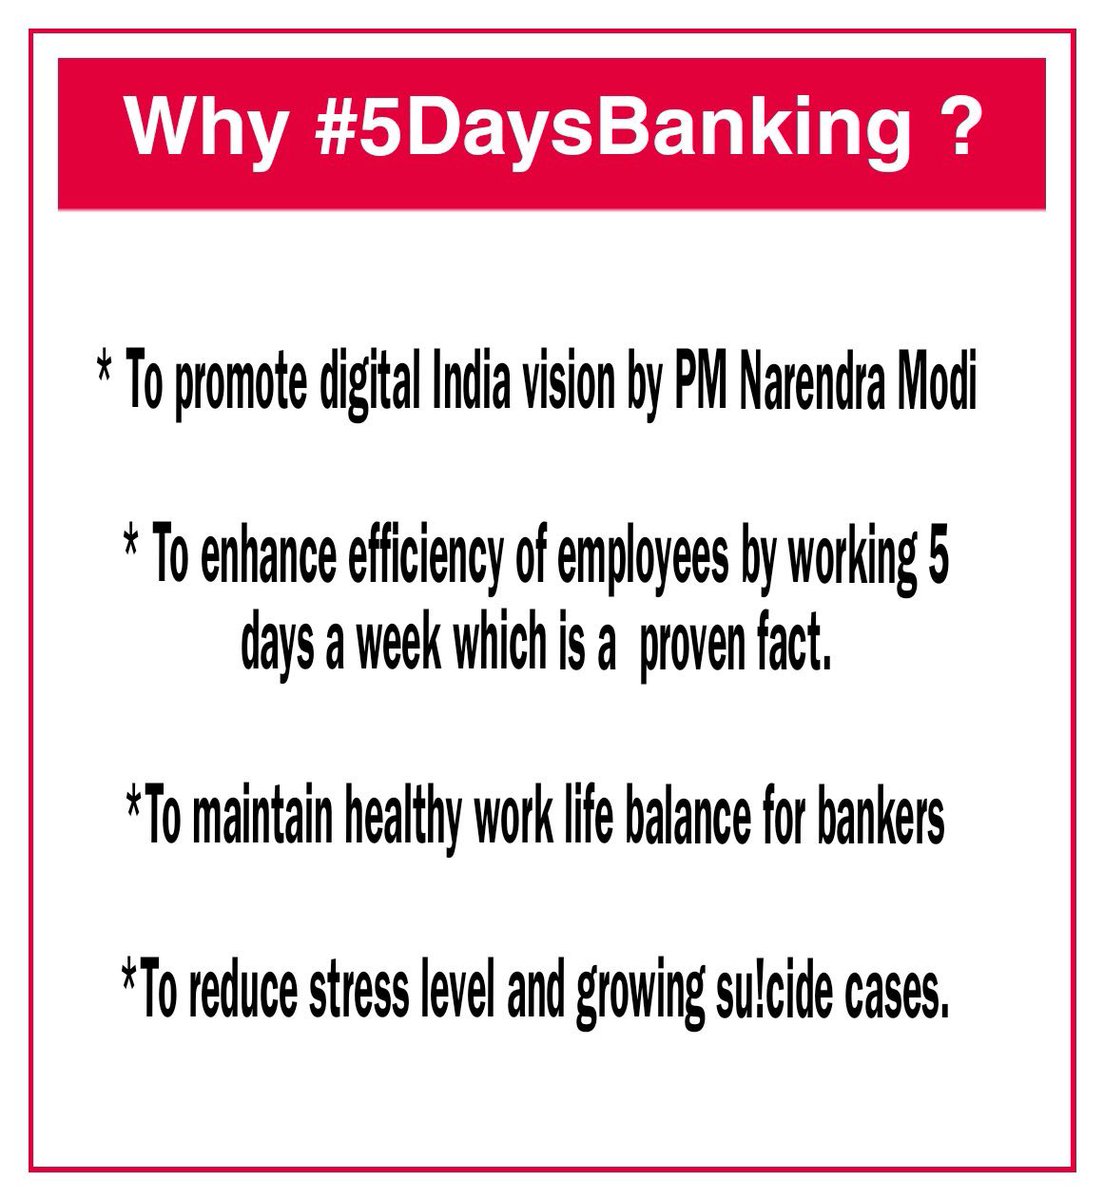 When the world is moving towards Digital way and most of the financial markets are working only on 5 days, it’s time for Bankers are also to be given 5 days banking…#5DaysBanking